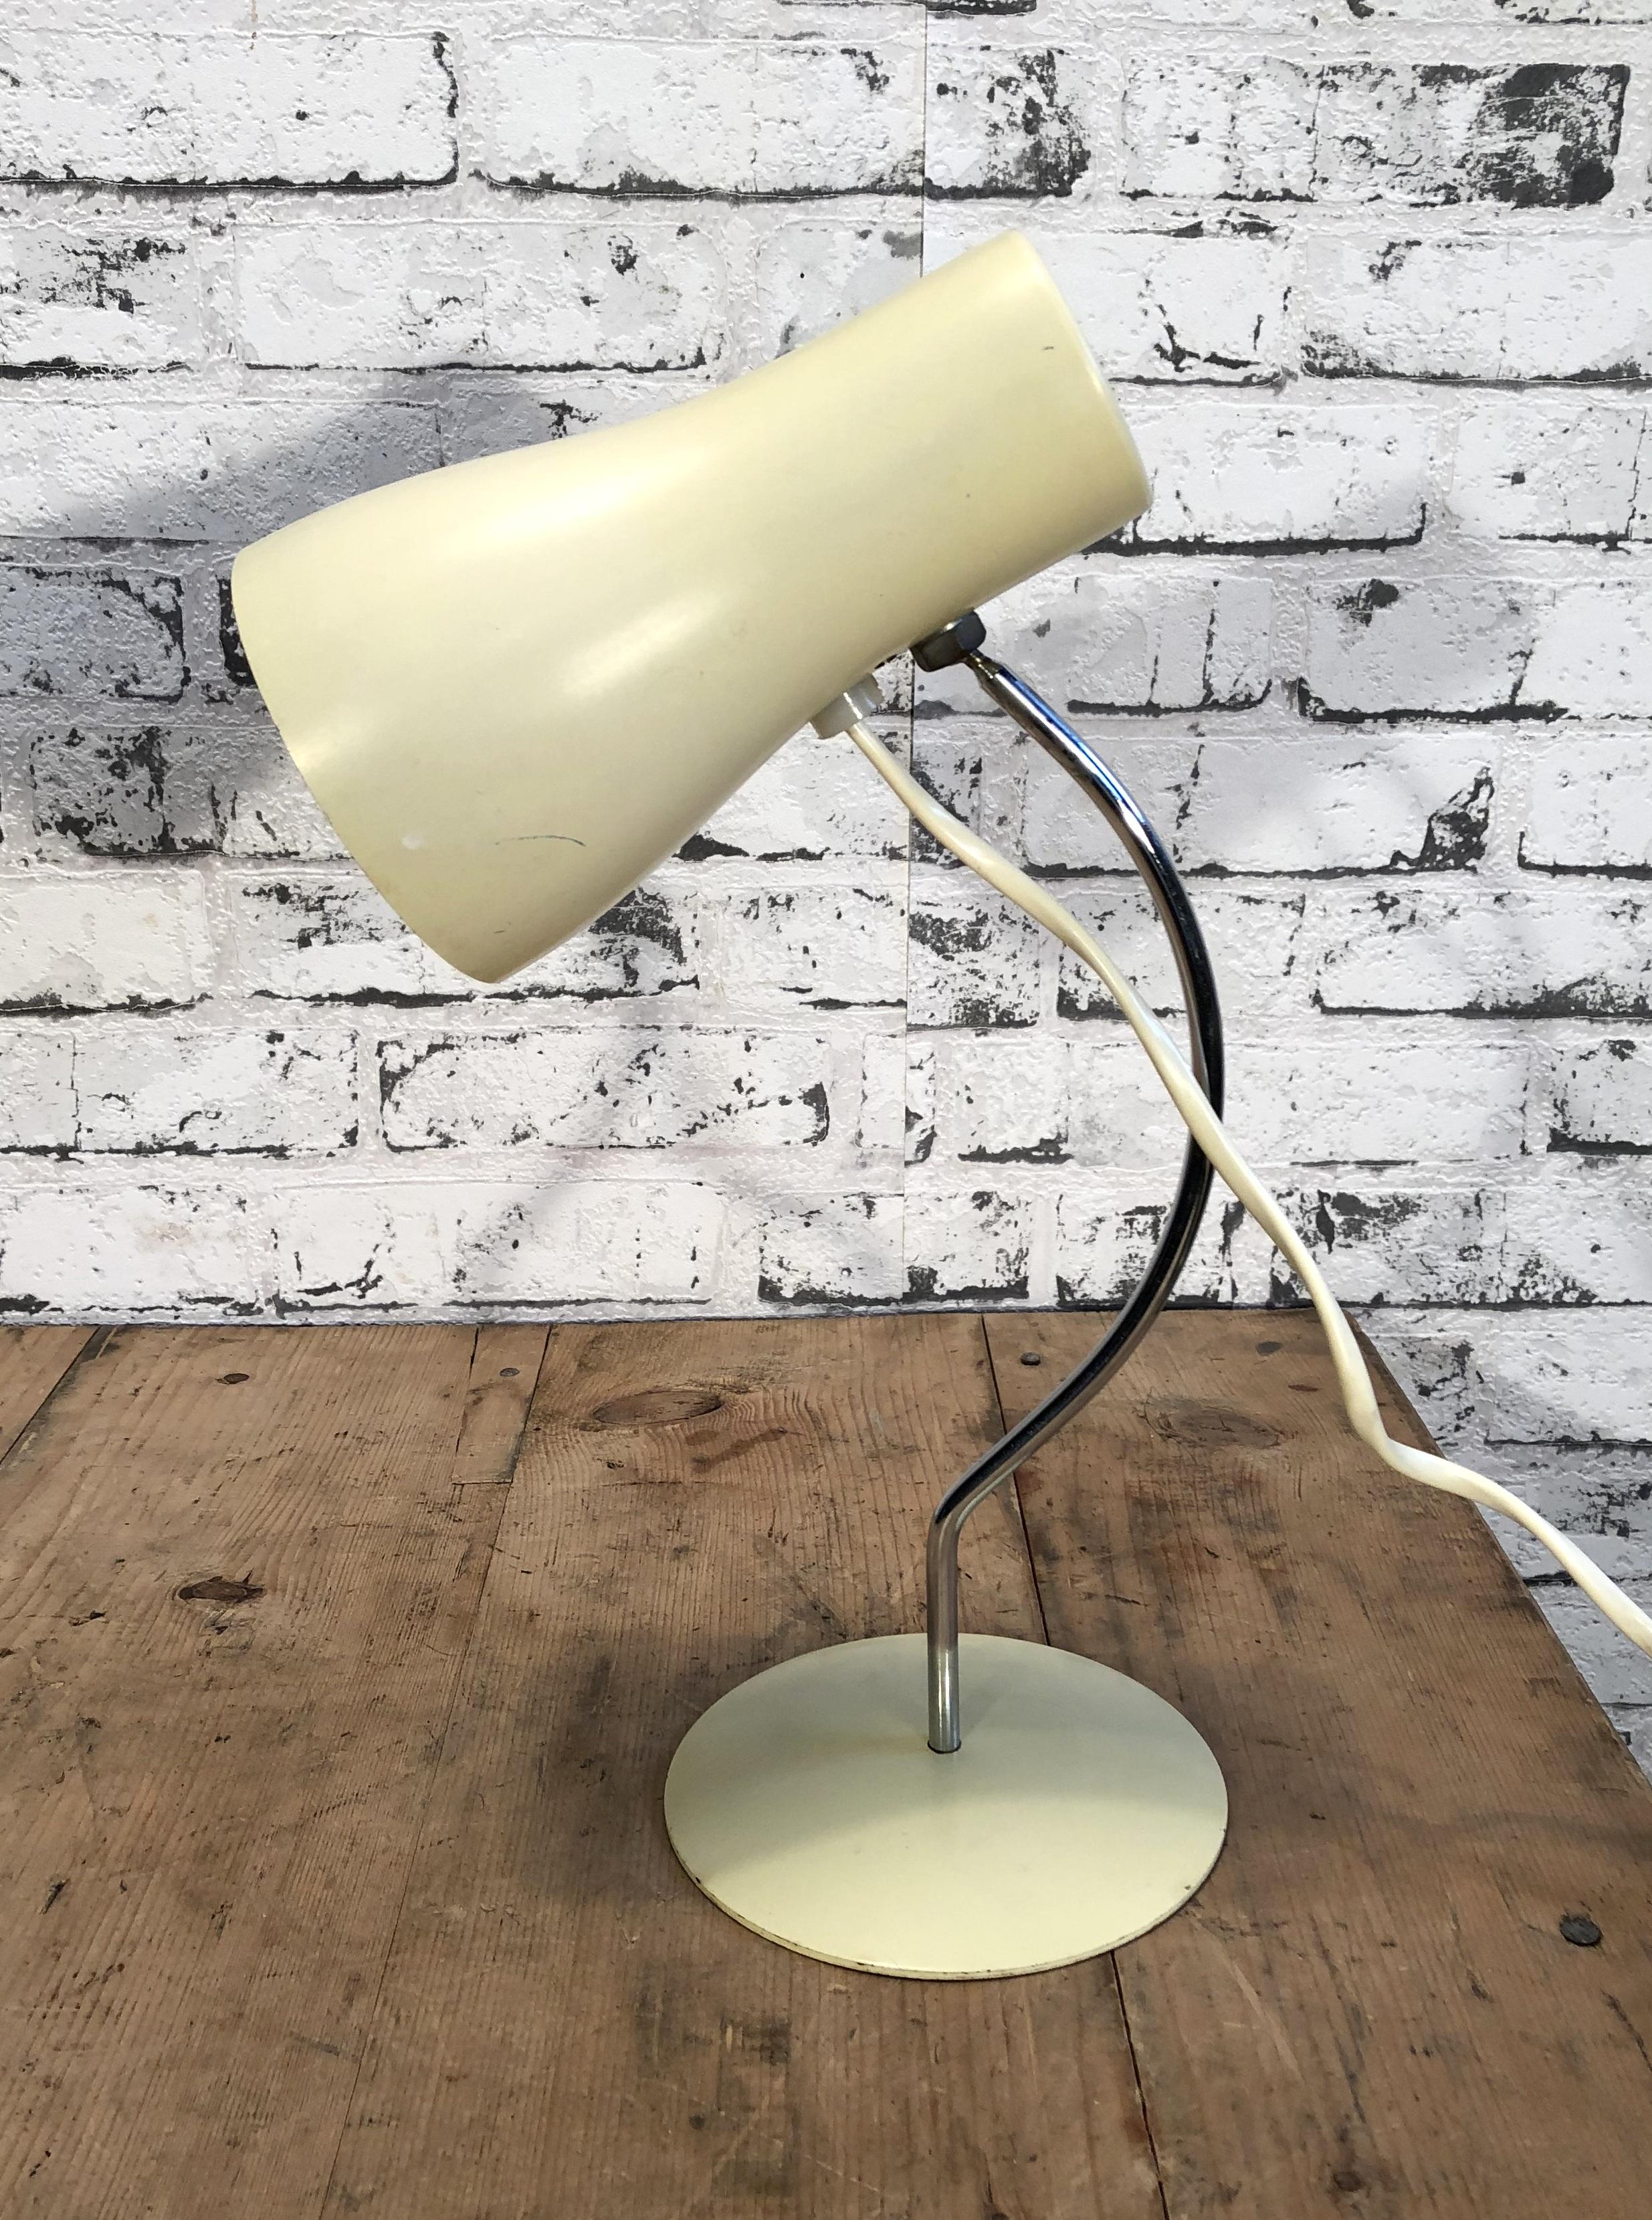 This table lamp, Napako model 1633, was designed by Josef Hurka and produced in former Czecholovakia by Napako during the 1960s. Lamp has steel body and metal lampshade. In a good vintage condition. Small signs of use. Fully functional. Socket for E